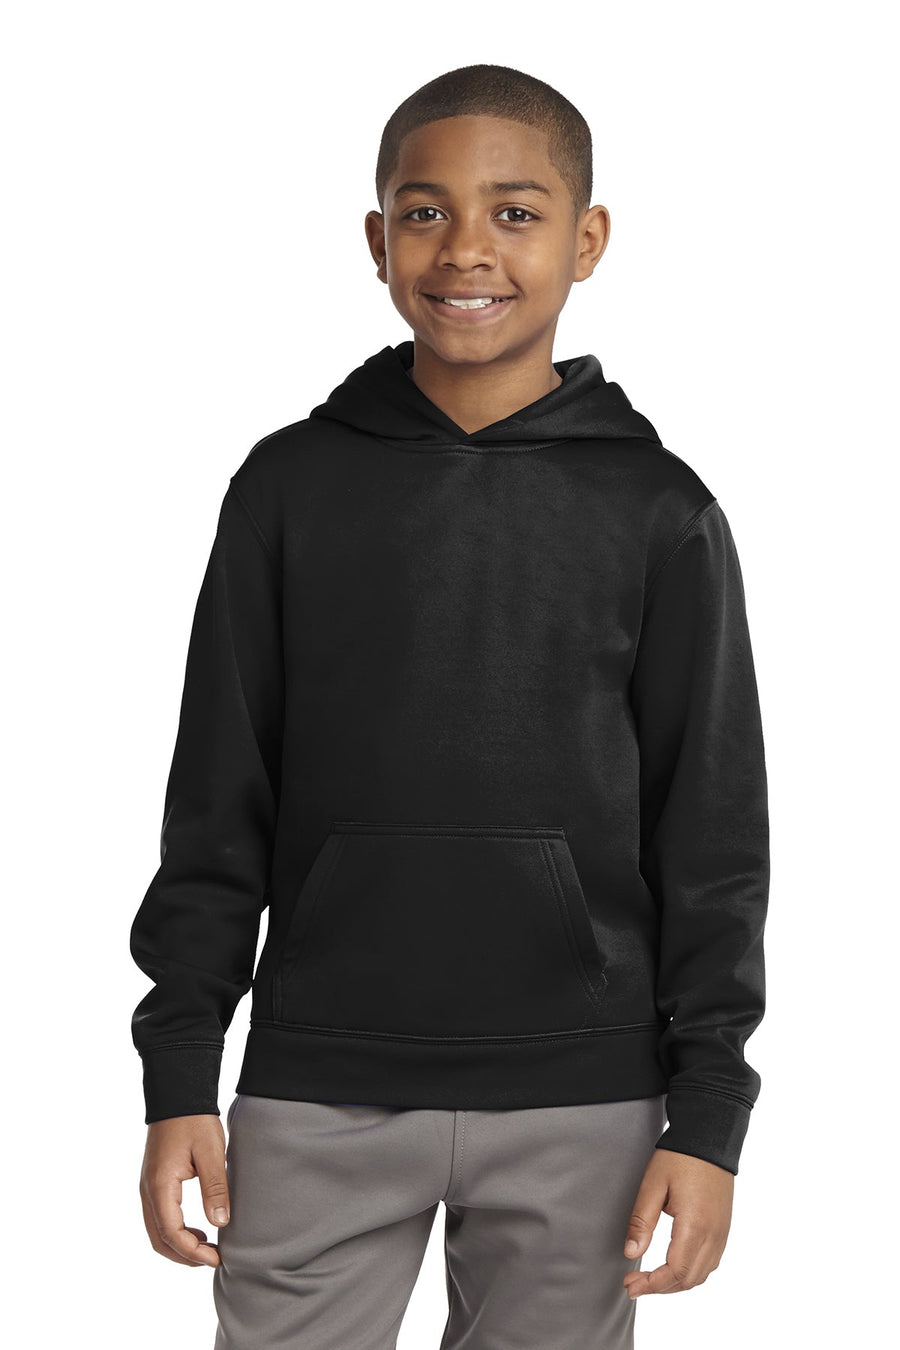 Youth Sport Fleece Hooded Pullover - Clay Soccer